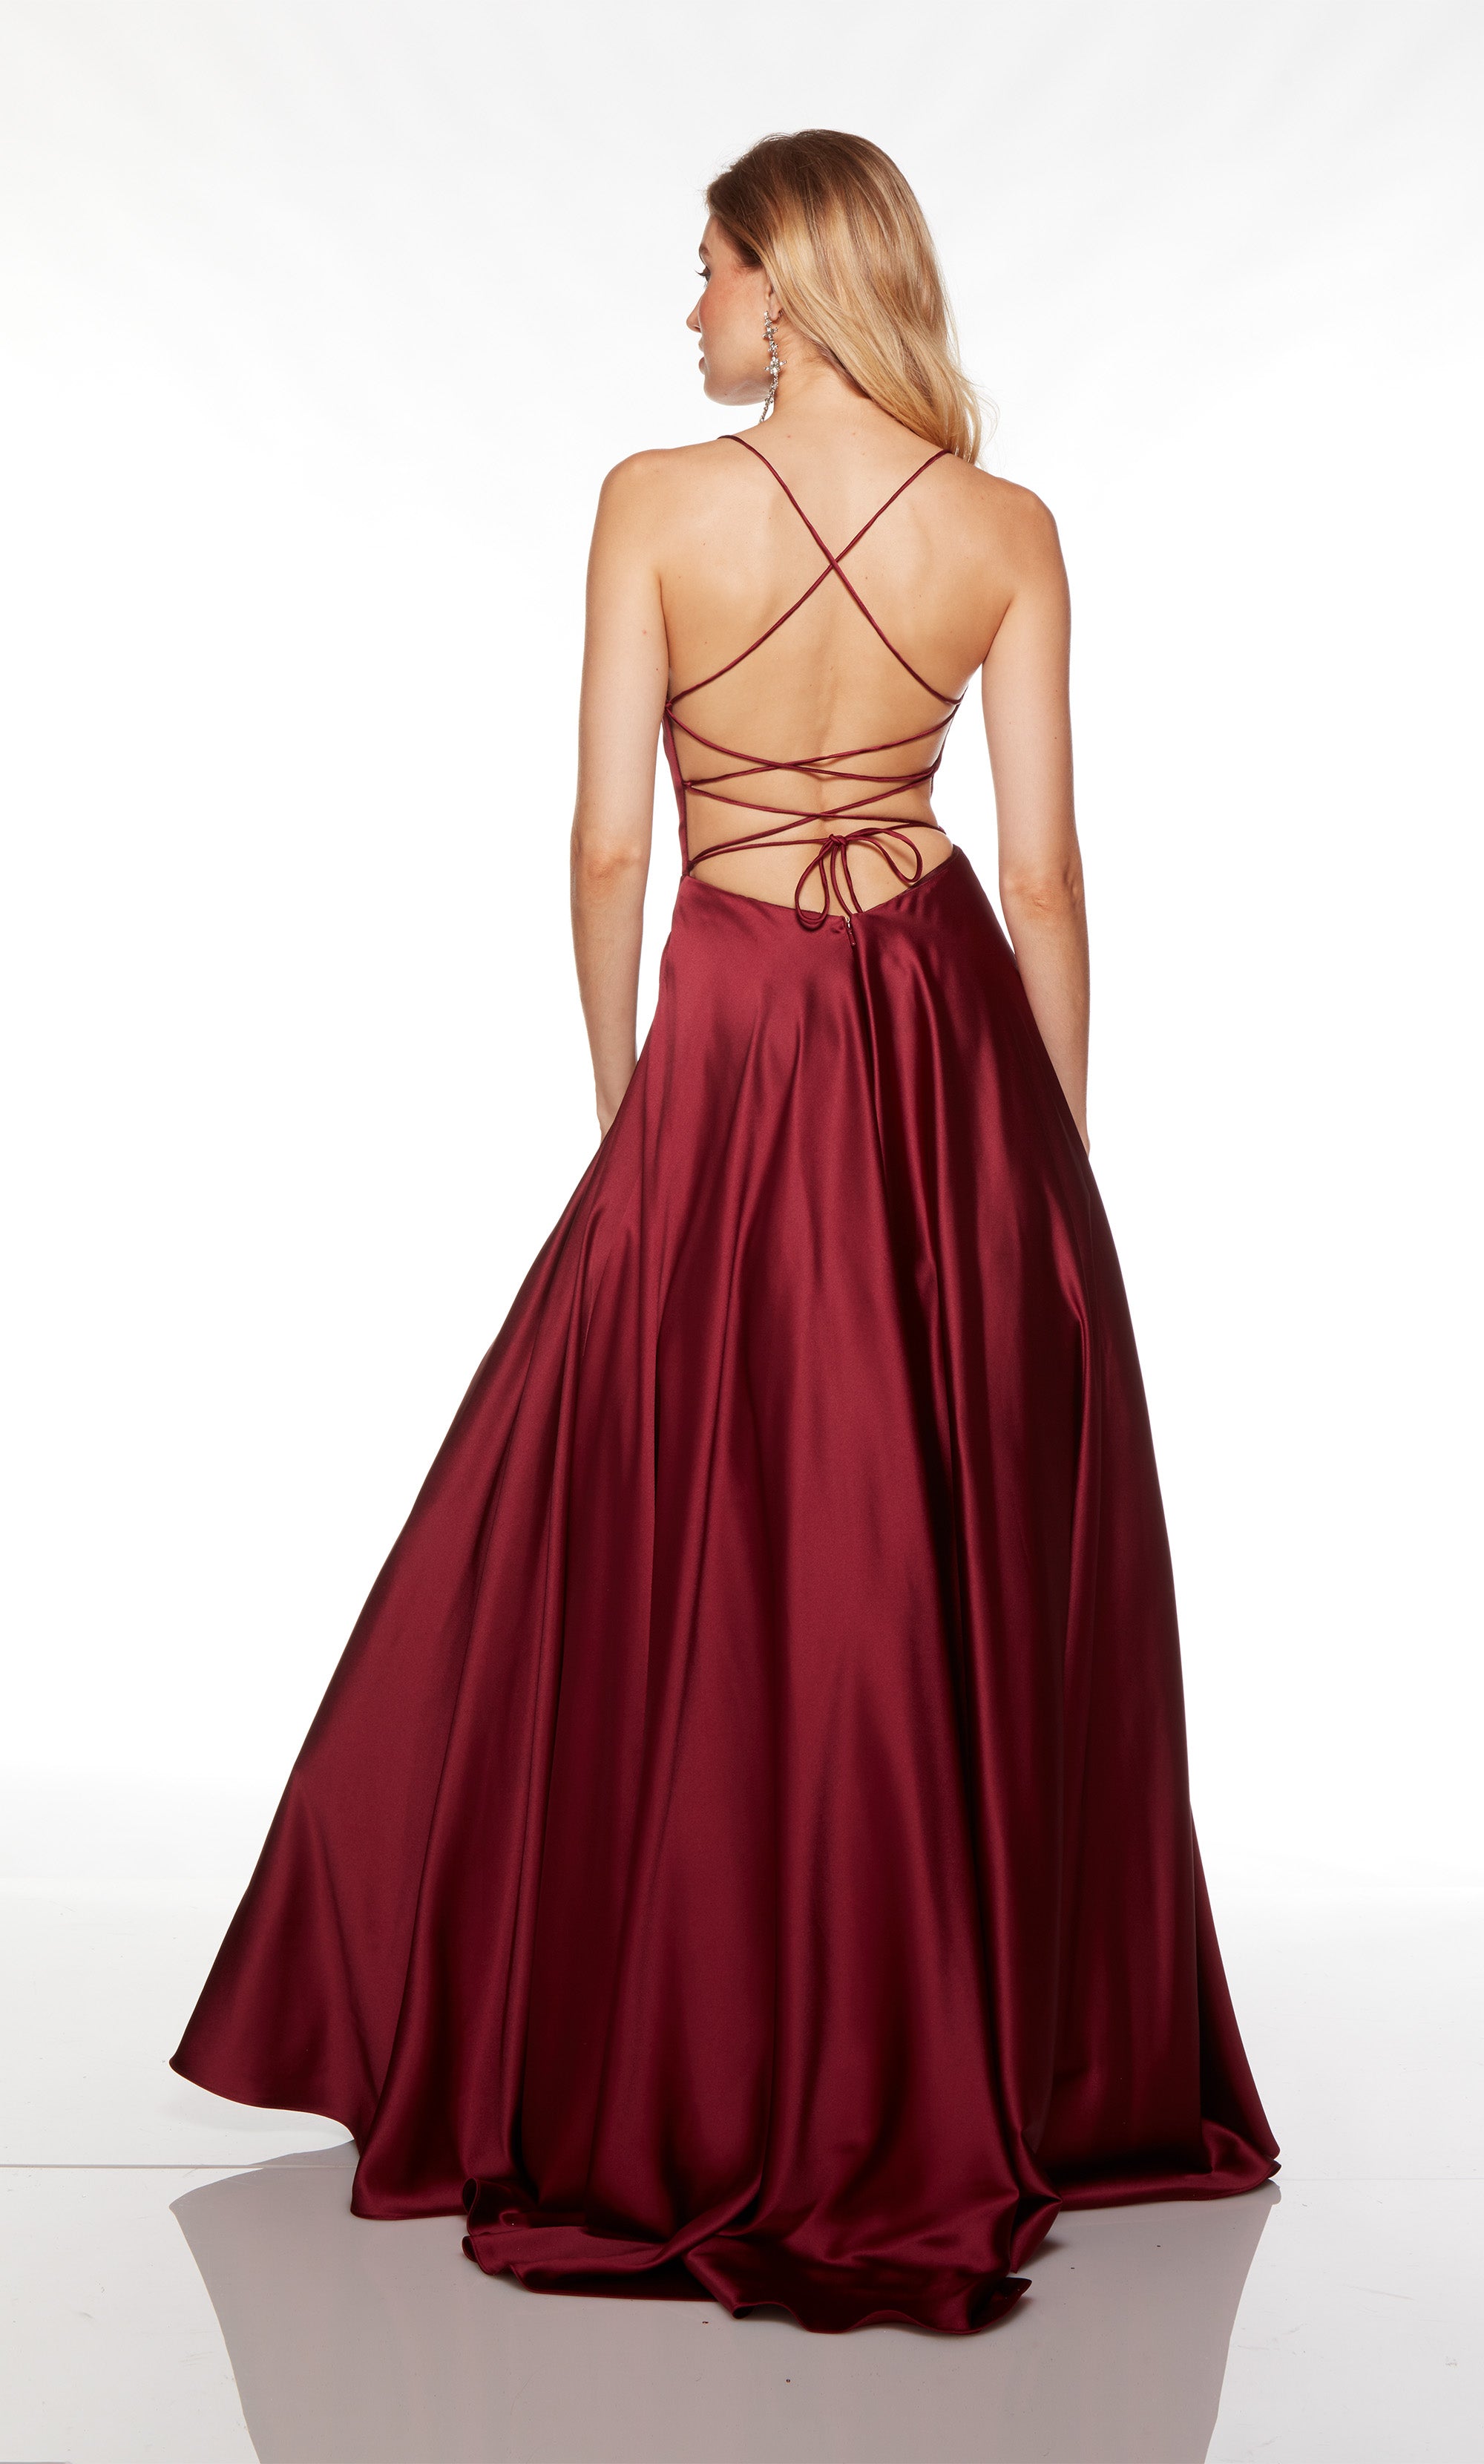 Sexy Spaghetti Straps Red And Black Prom Dresses With Slit - Cetims